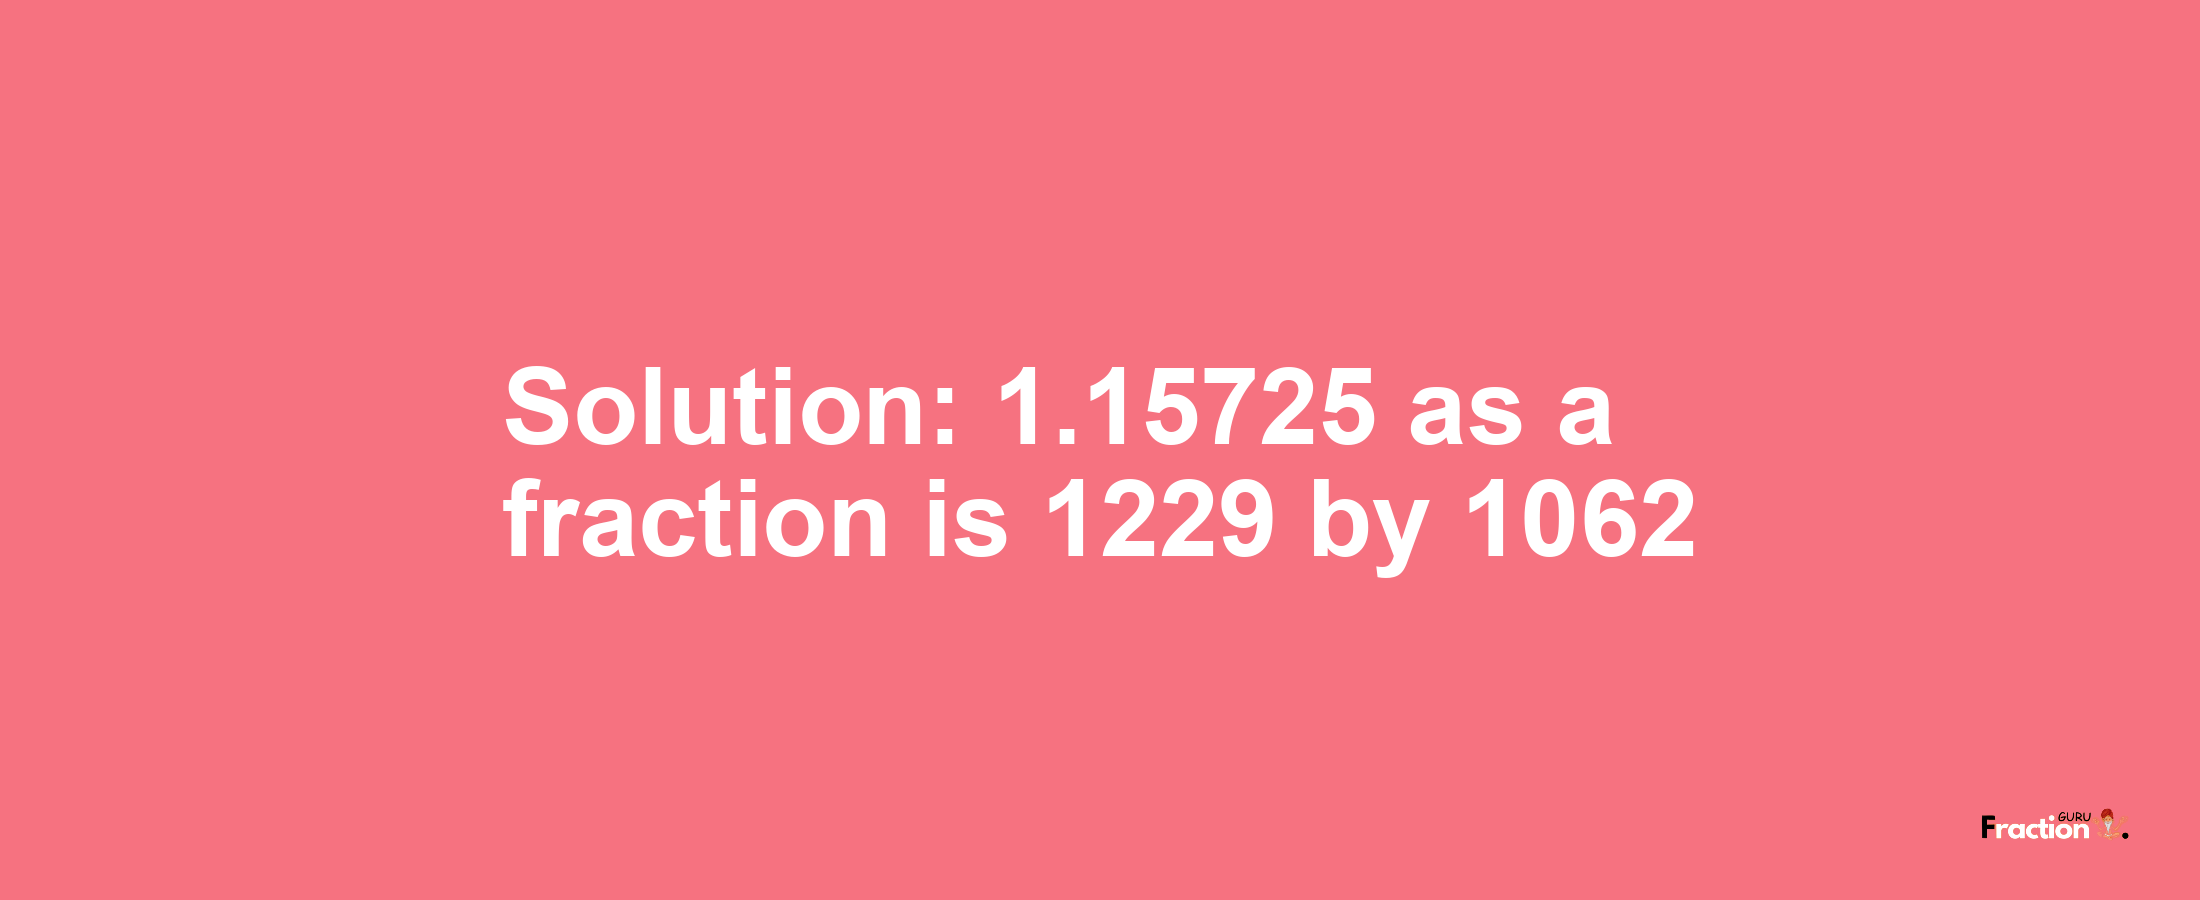 Solution:1.15725 as a fraction is 1229/1062